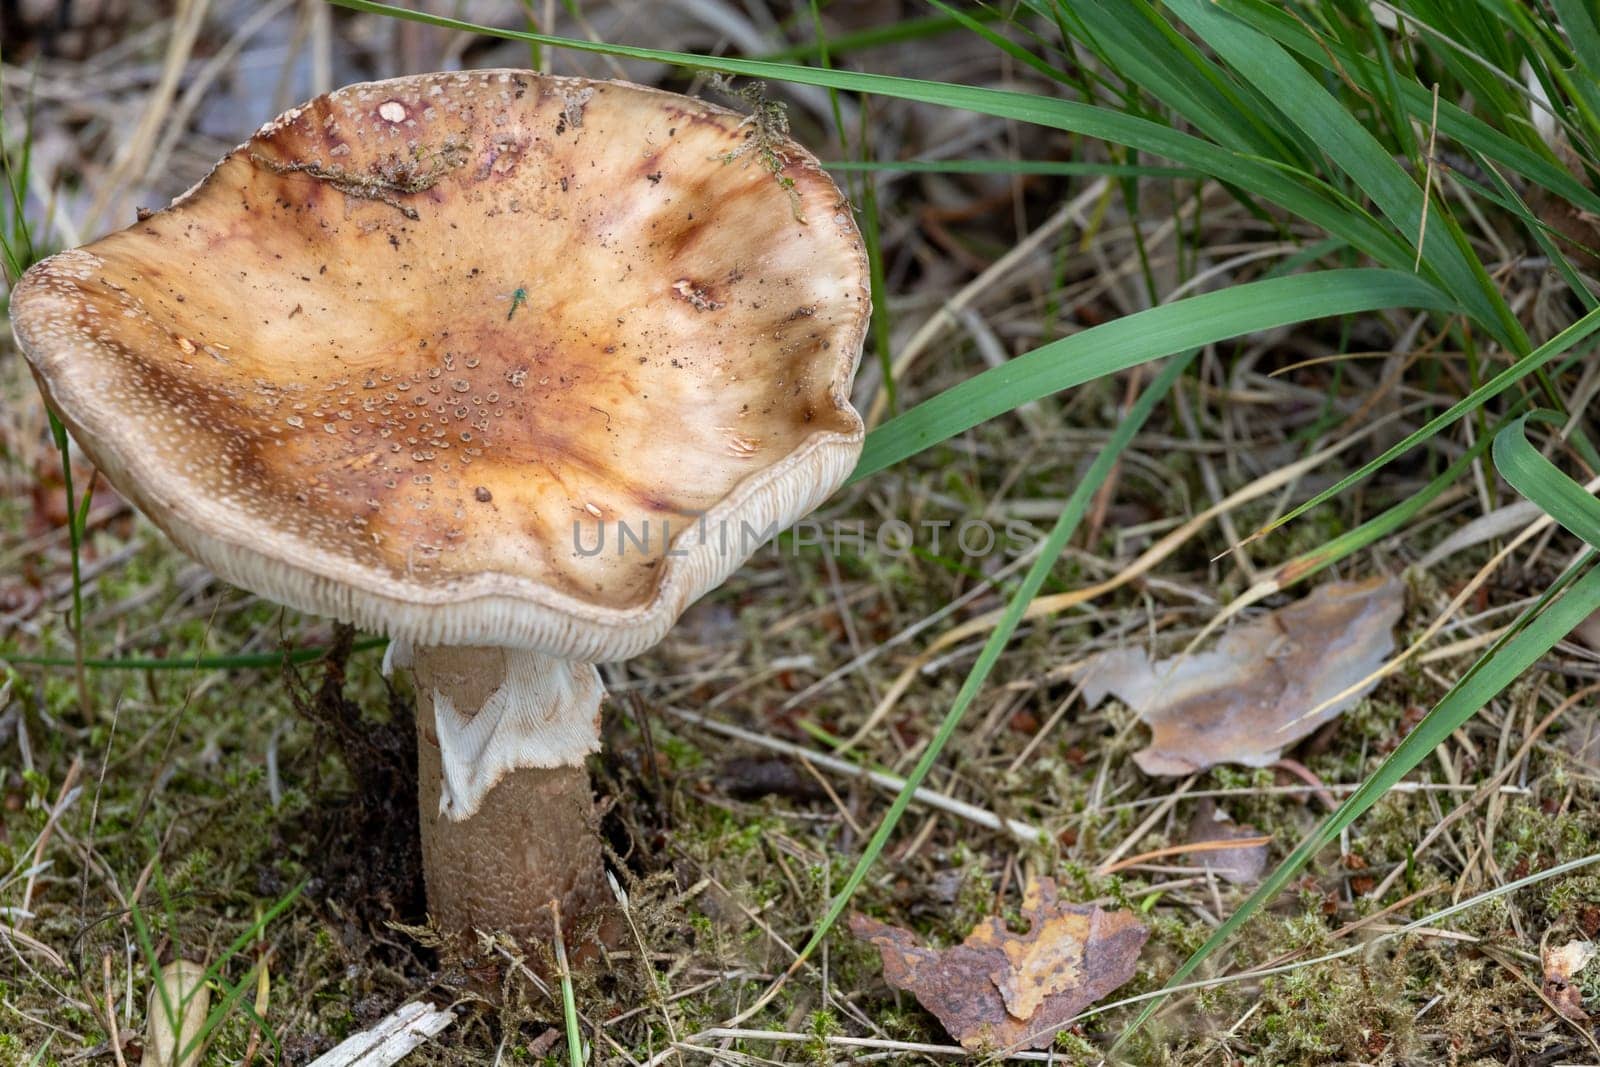 A single pig mushroom sitting amongst lush green grass in a natural outdoor setting